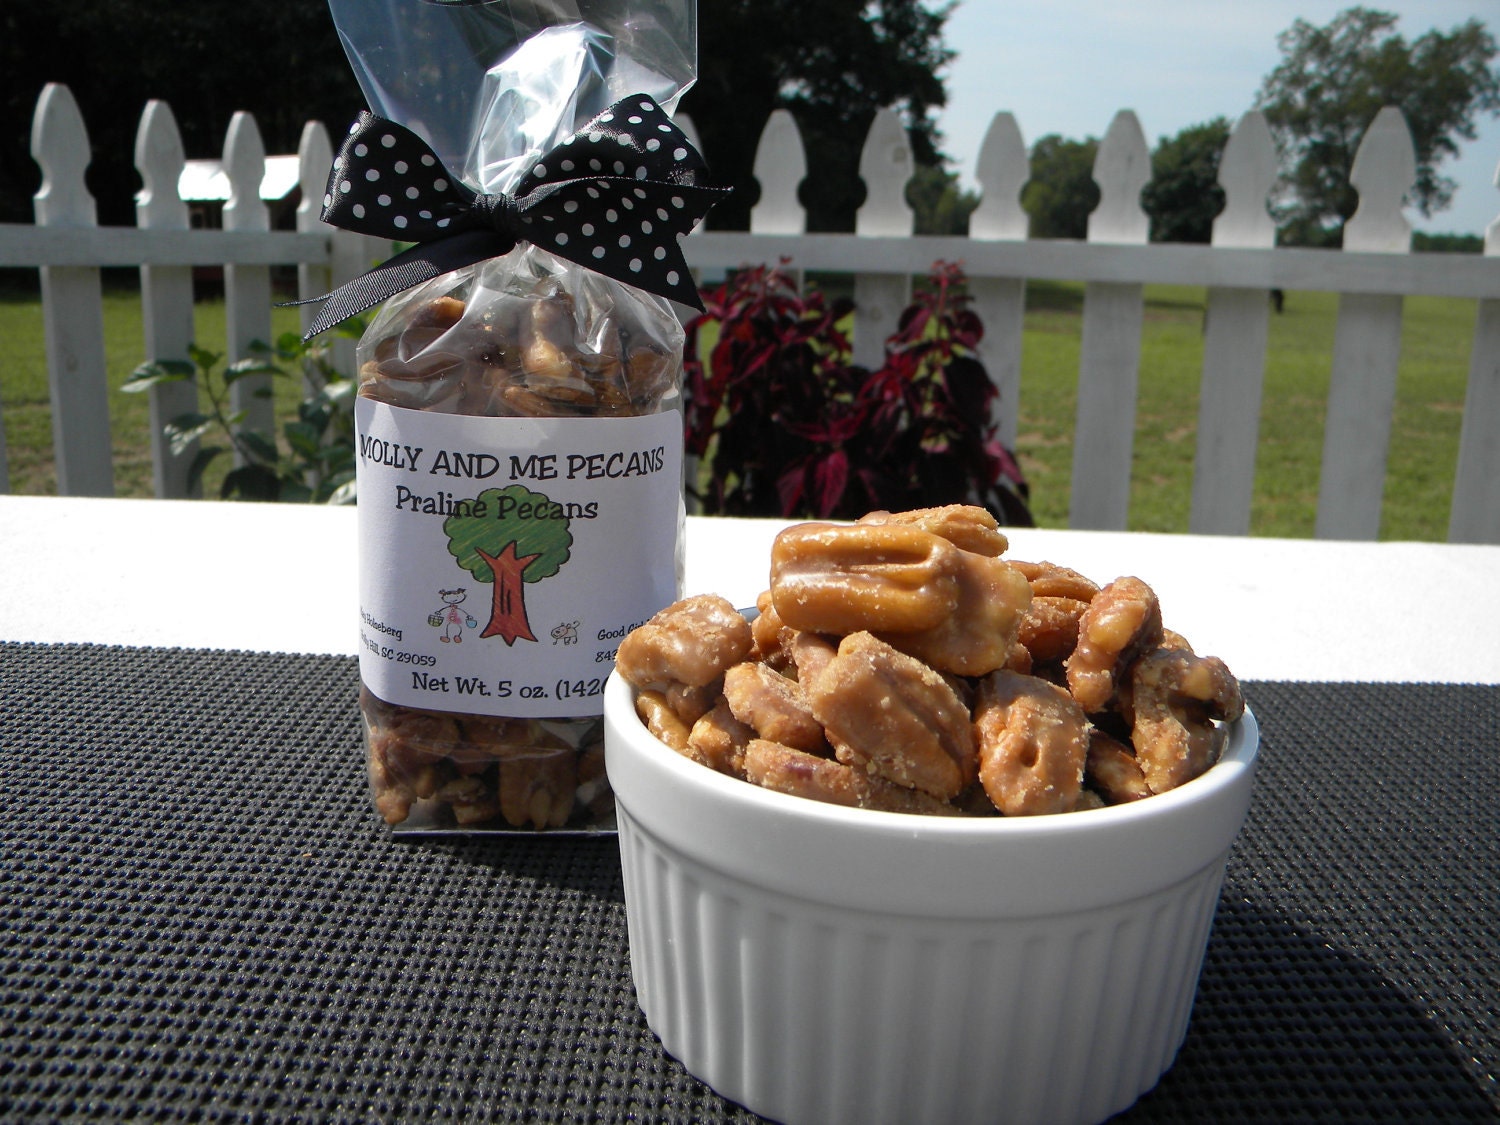 Praline Pecans - From our Farm to You